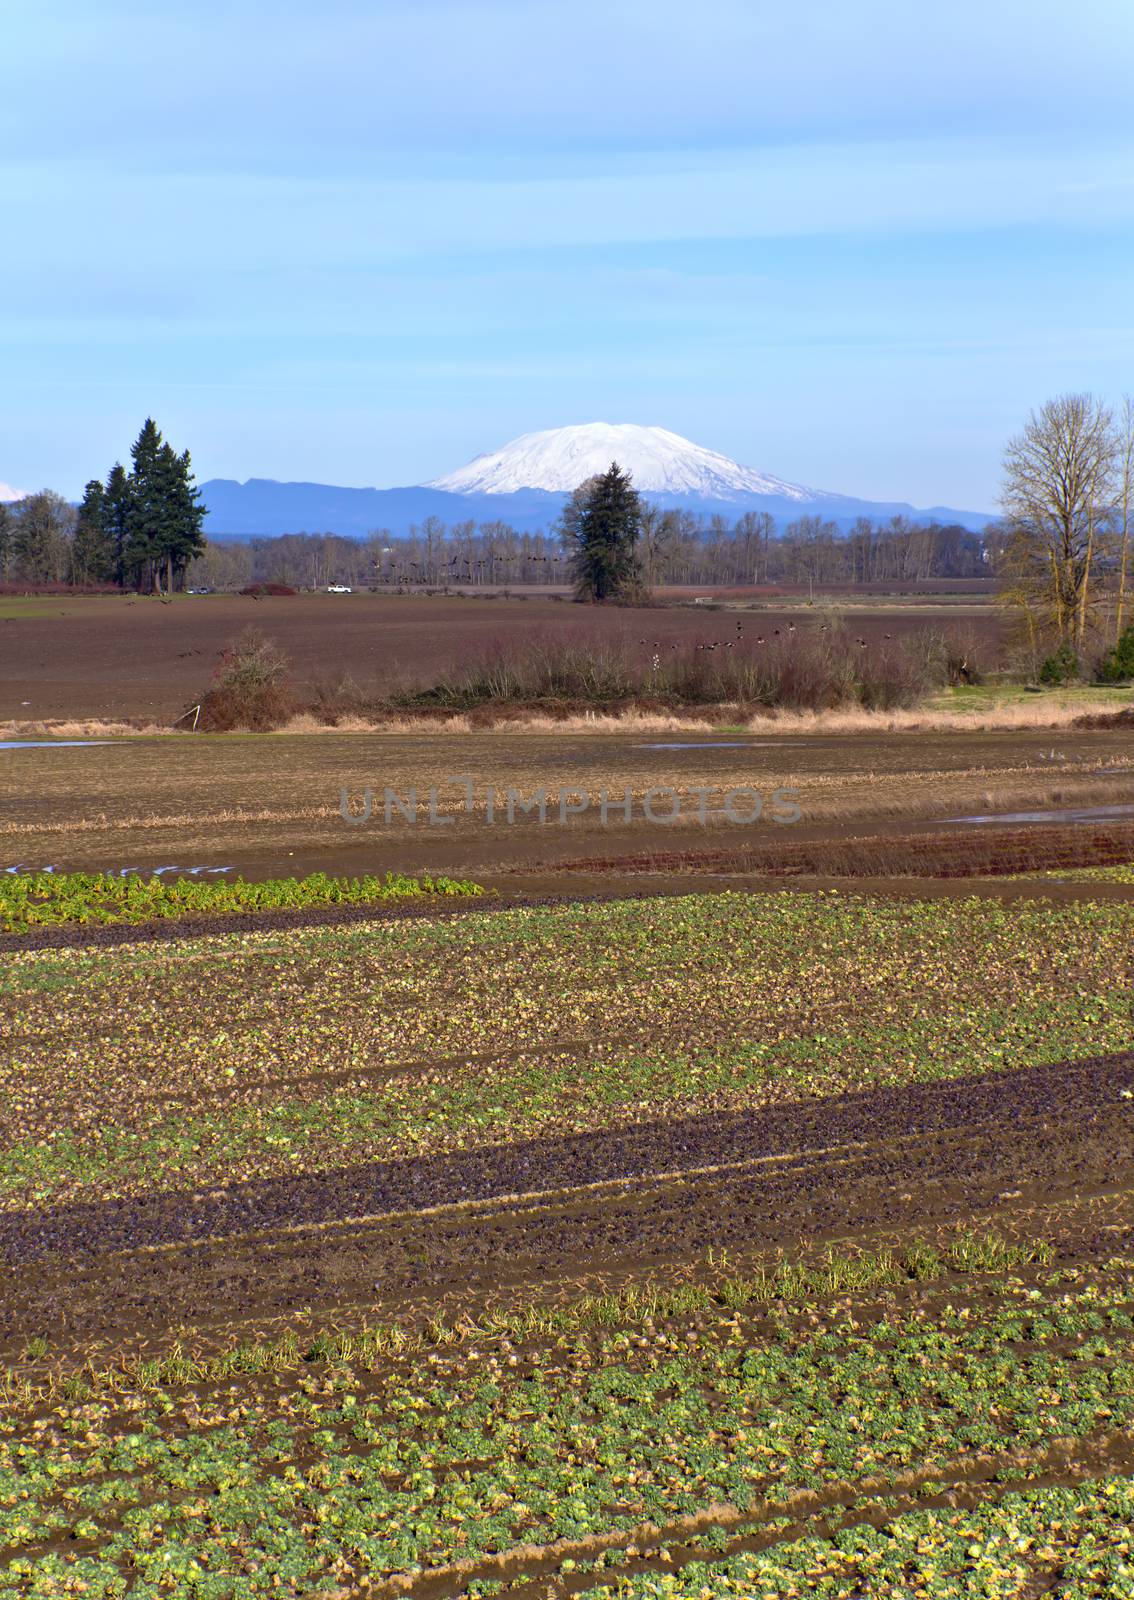 Mt. St. Helens and farm fields Oregon. by Rigucci